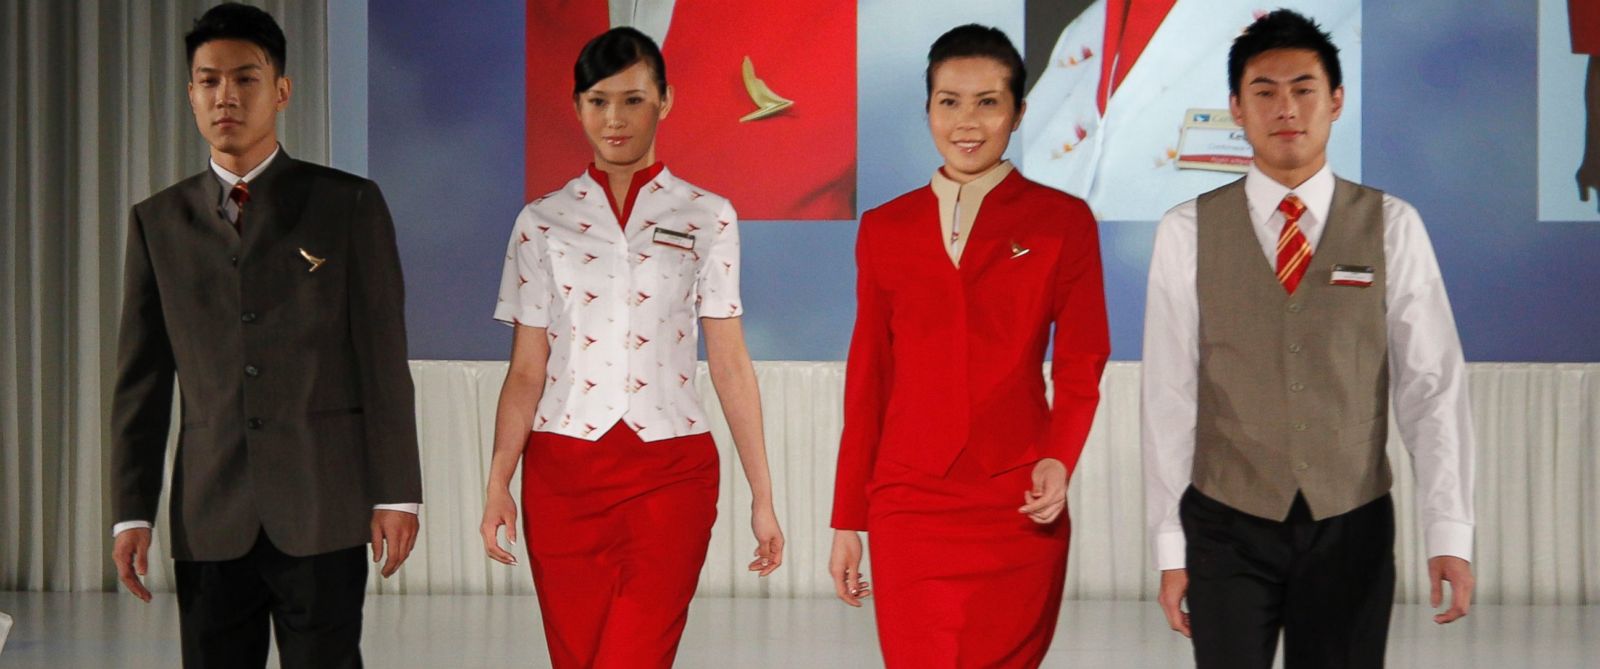 PHOTO:The South China Morning Post reported Cathay Pacific flight attendants are asking the airline to redesign its uniforms for women because they are too revealing and may provoke sexual harassment.